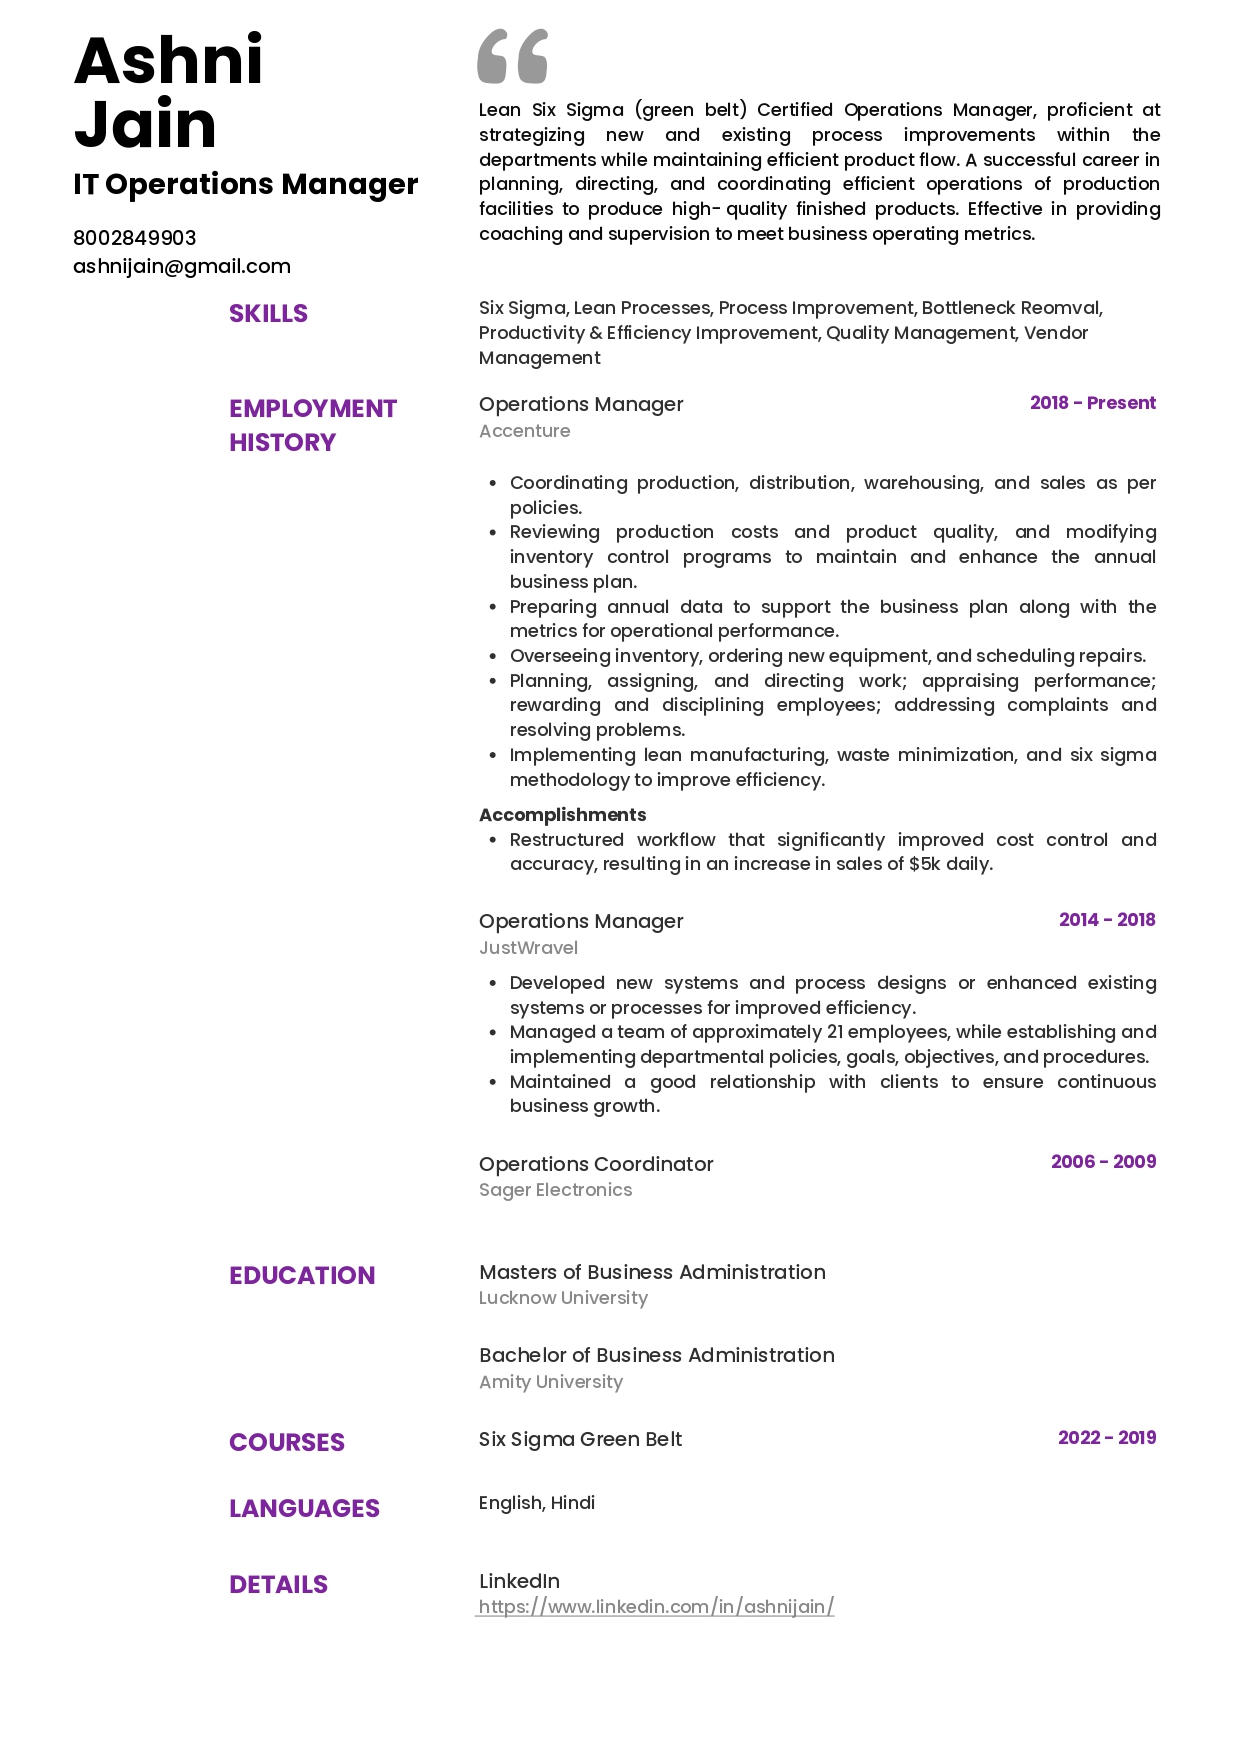 Resume of Operations Manager (IT)